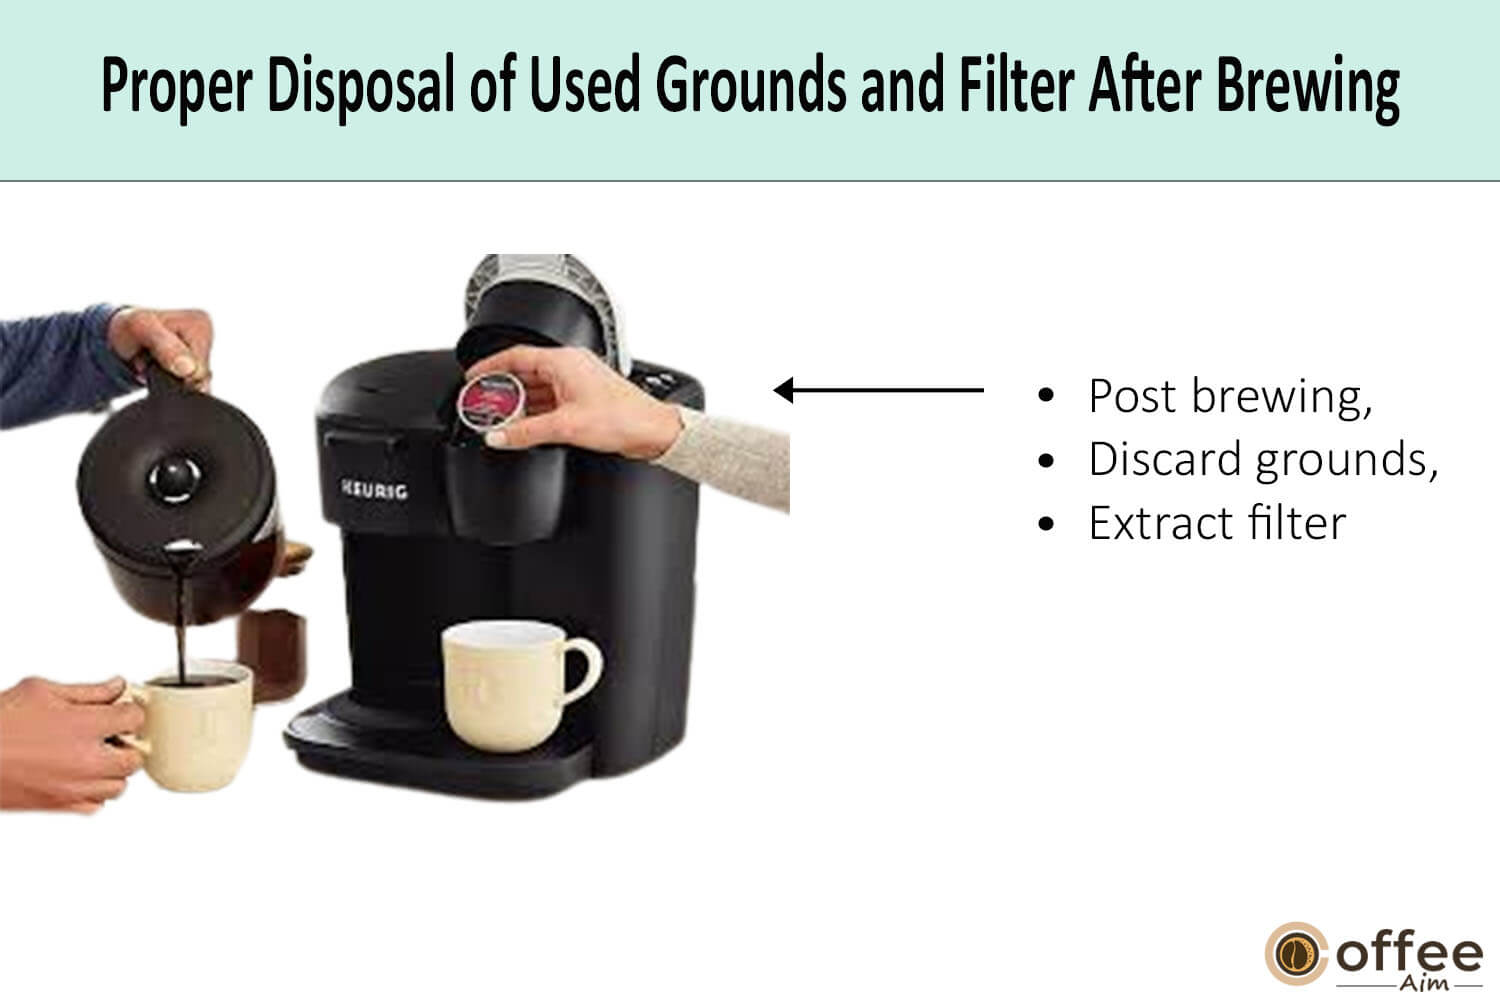 In this image, I elucidate the how to dispose filter after brew.